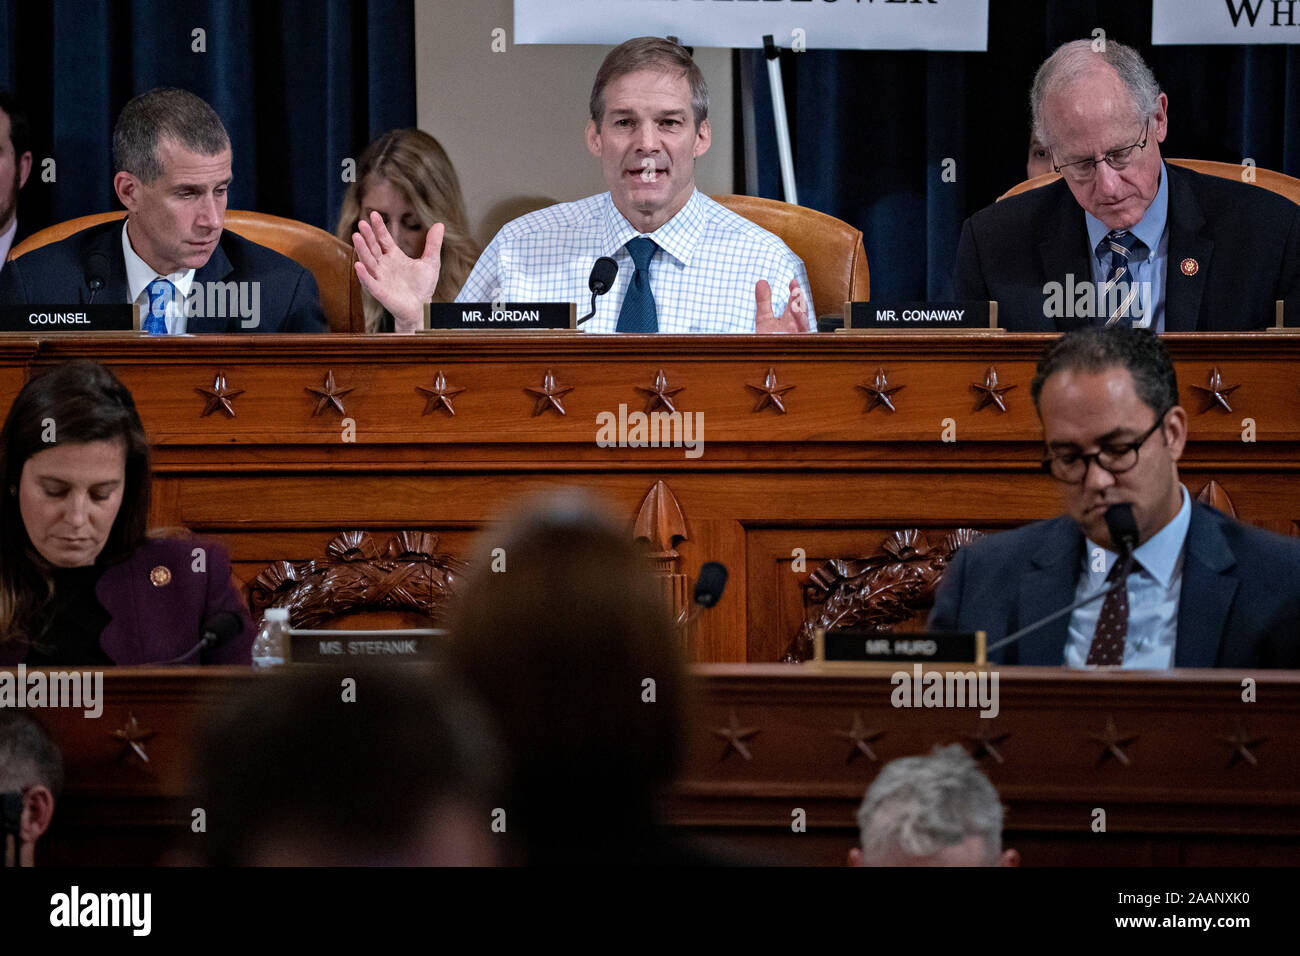 United States Representative Jim Jordan (Republican of Ohio), top center, questions witnesses as Steve Castor, general counsel for the US House Oversight and Government Reform Committee, top left, and US Representative Mike Conaway (Republican of Texas), top right, listen during a House Intelligence Committee impeachment inquiry hearing in Washington, DC, U.S., on Thursday, Nov. 21, 2019. The committee heard from nine witnesses in open hearings this week in the impeachment inquiry into US President Donald J. Trump. Also pictured on the bottom row are US Representative Elise Stefanik (Republi Stock Photo